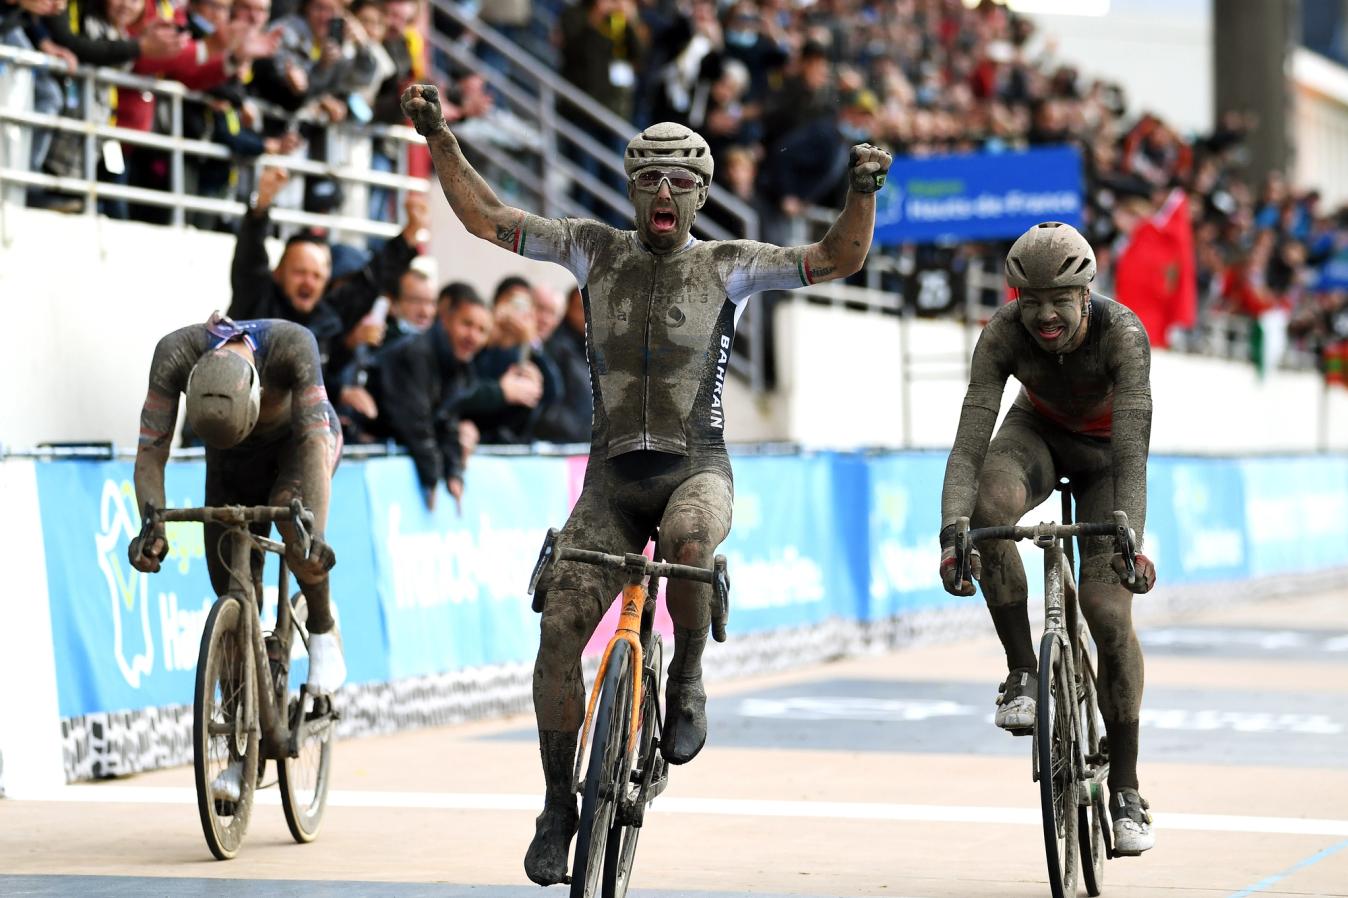 All three podium finishers at the 2021 Paris-Roubaix were riding on debut 